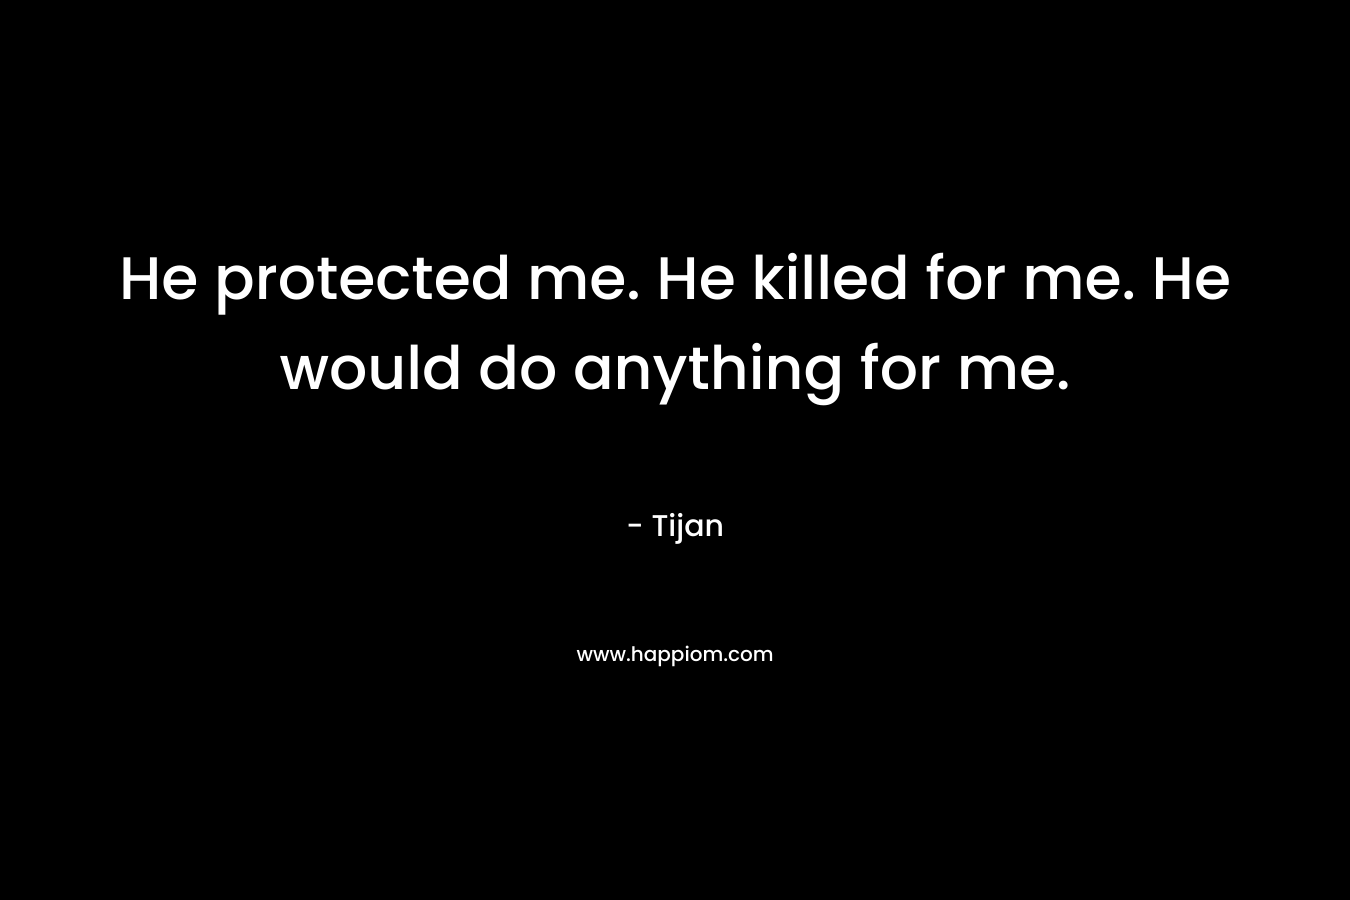 He protected me. He killed for me. He would do anything for me. – Tijan